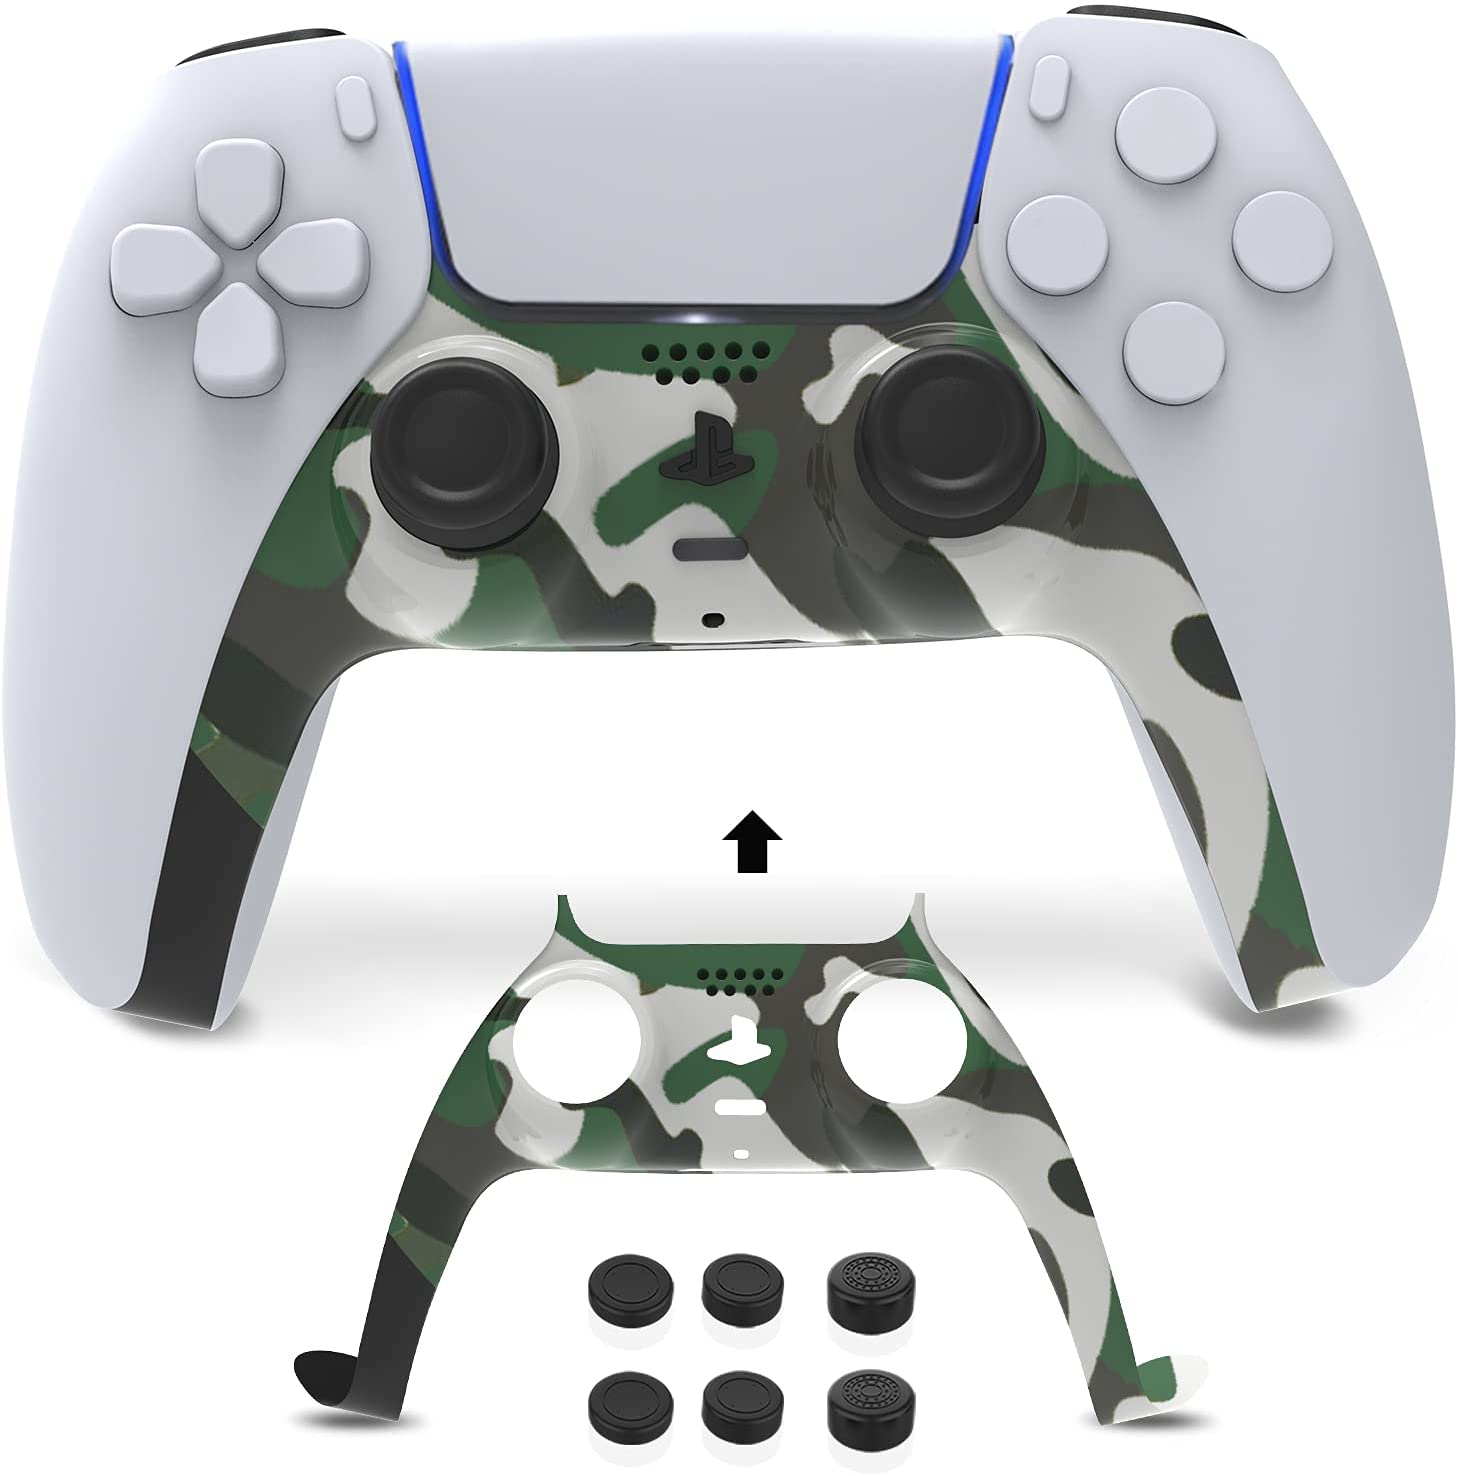 Green camouflage PS5 controller faceplates are available, along with three pairs of replacement joystick caps.